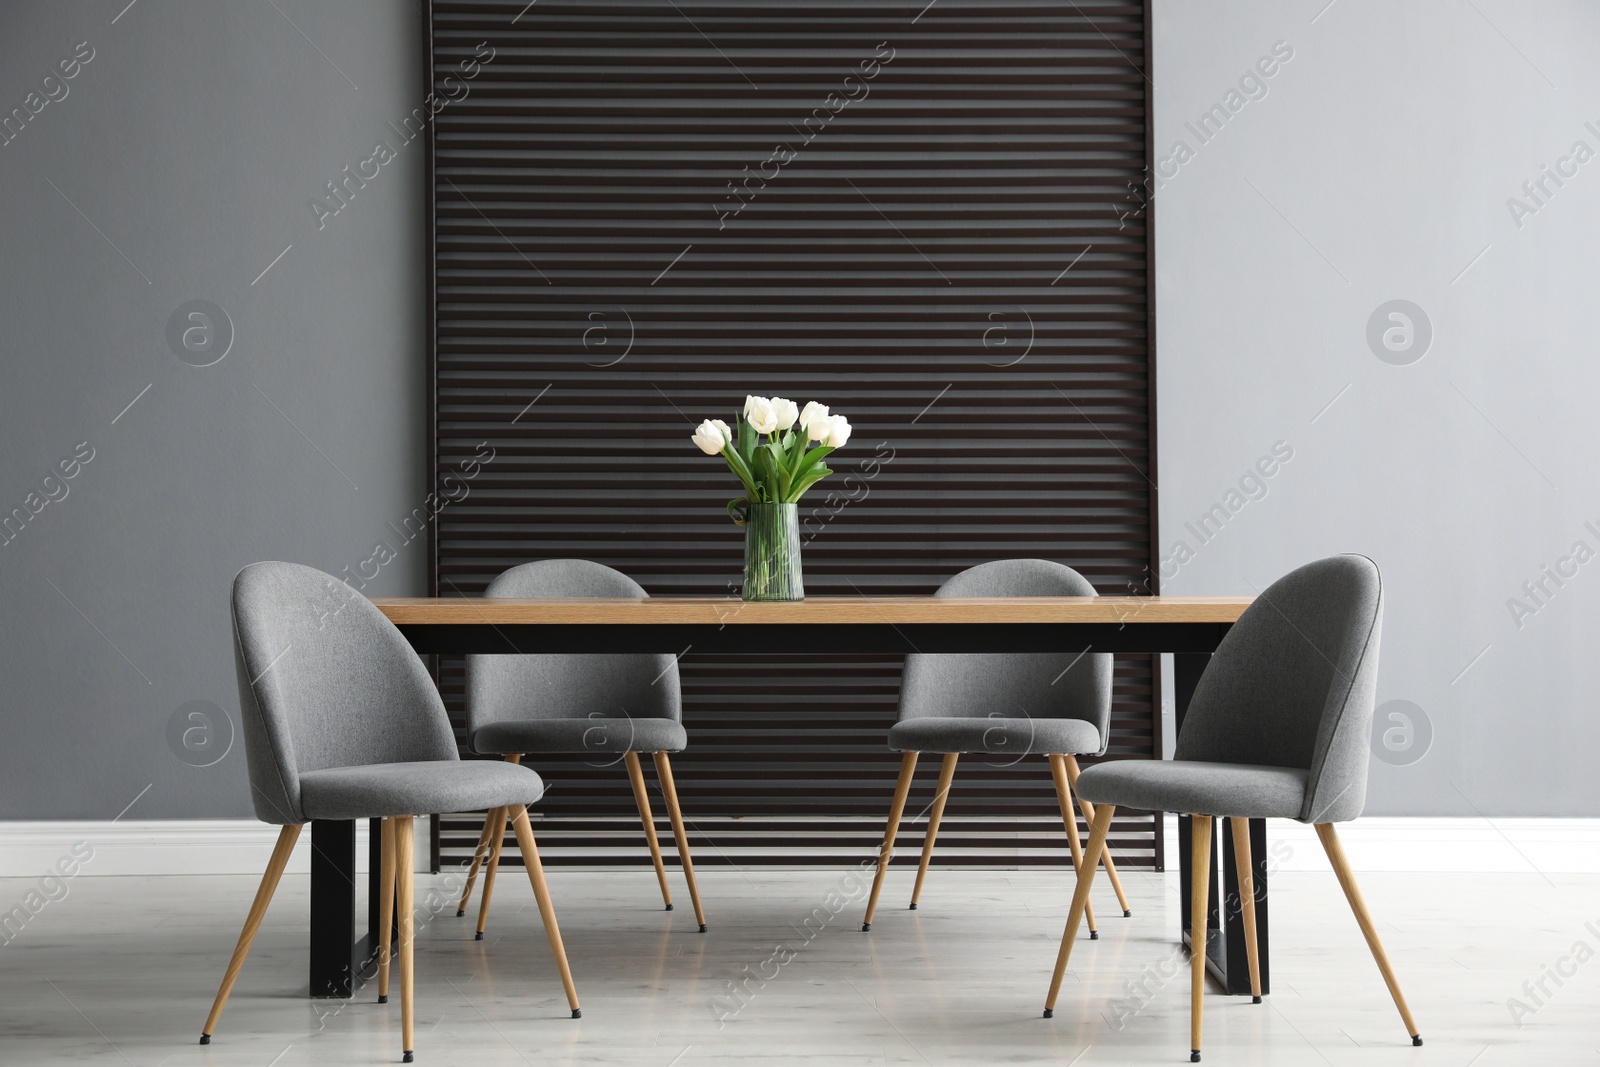 Photo of Table and chairs in room. Stylish interior design